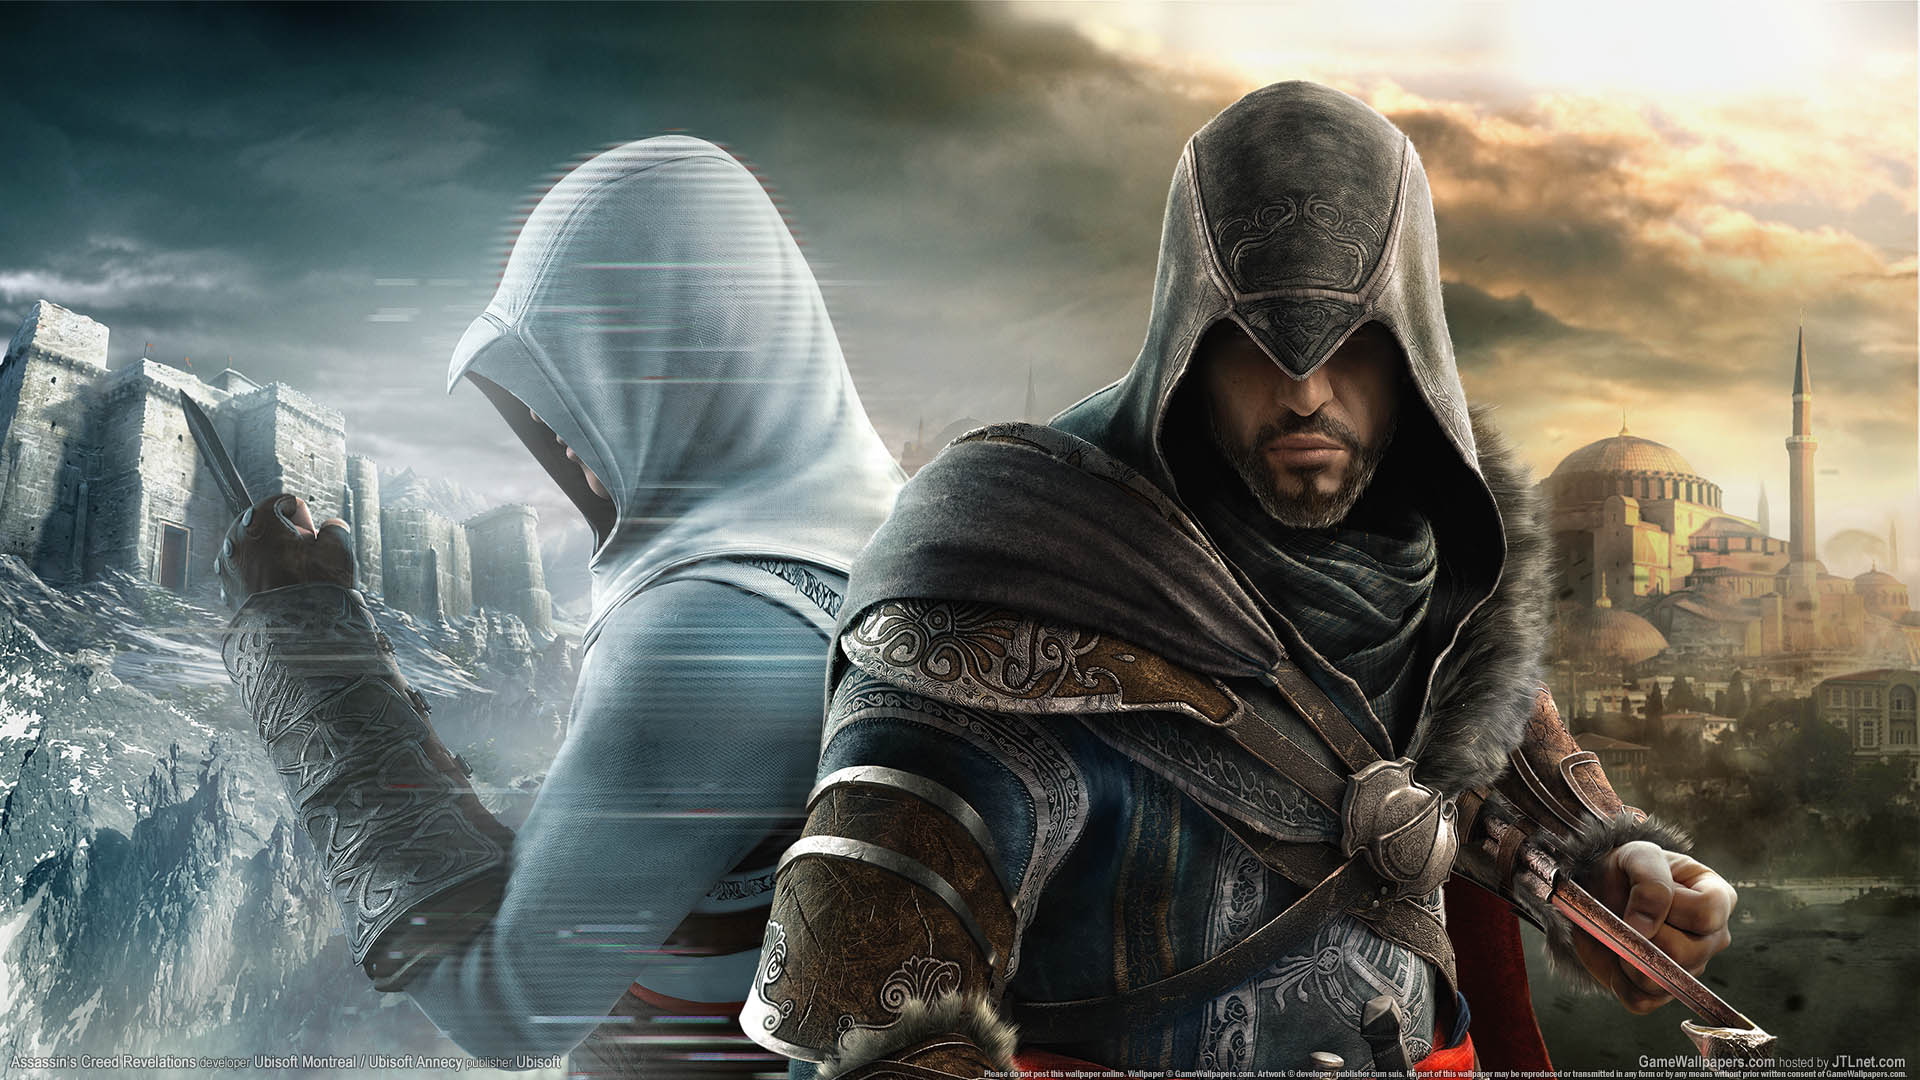 Assassin's Creed Revelations achtergrond 01 1920x1080